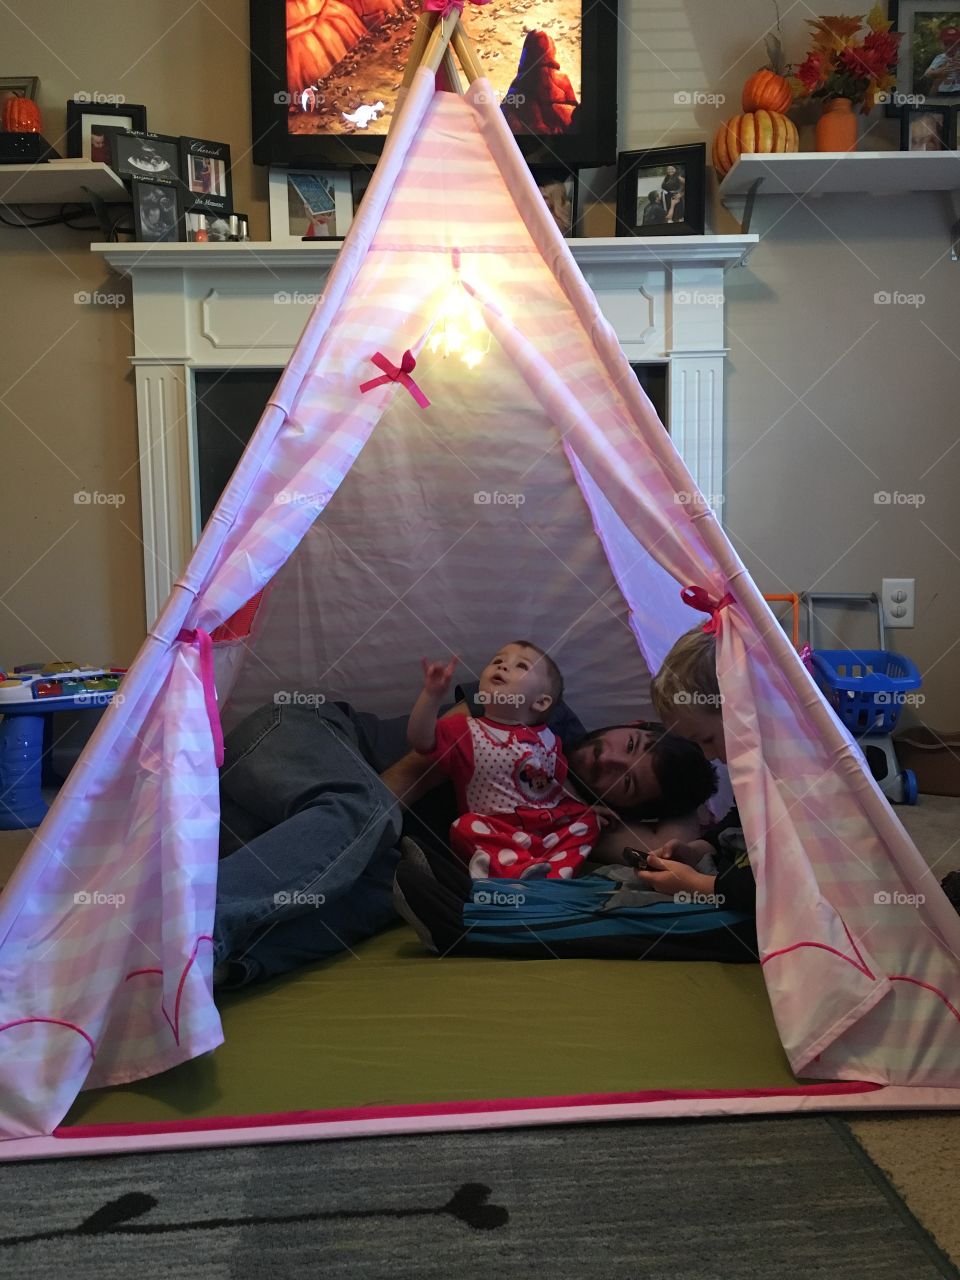 Man with children inside tent at home